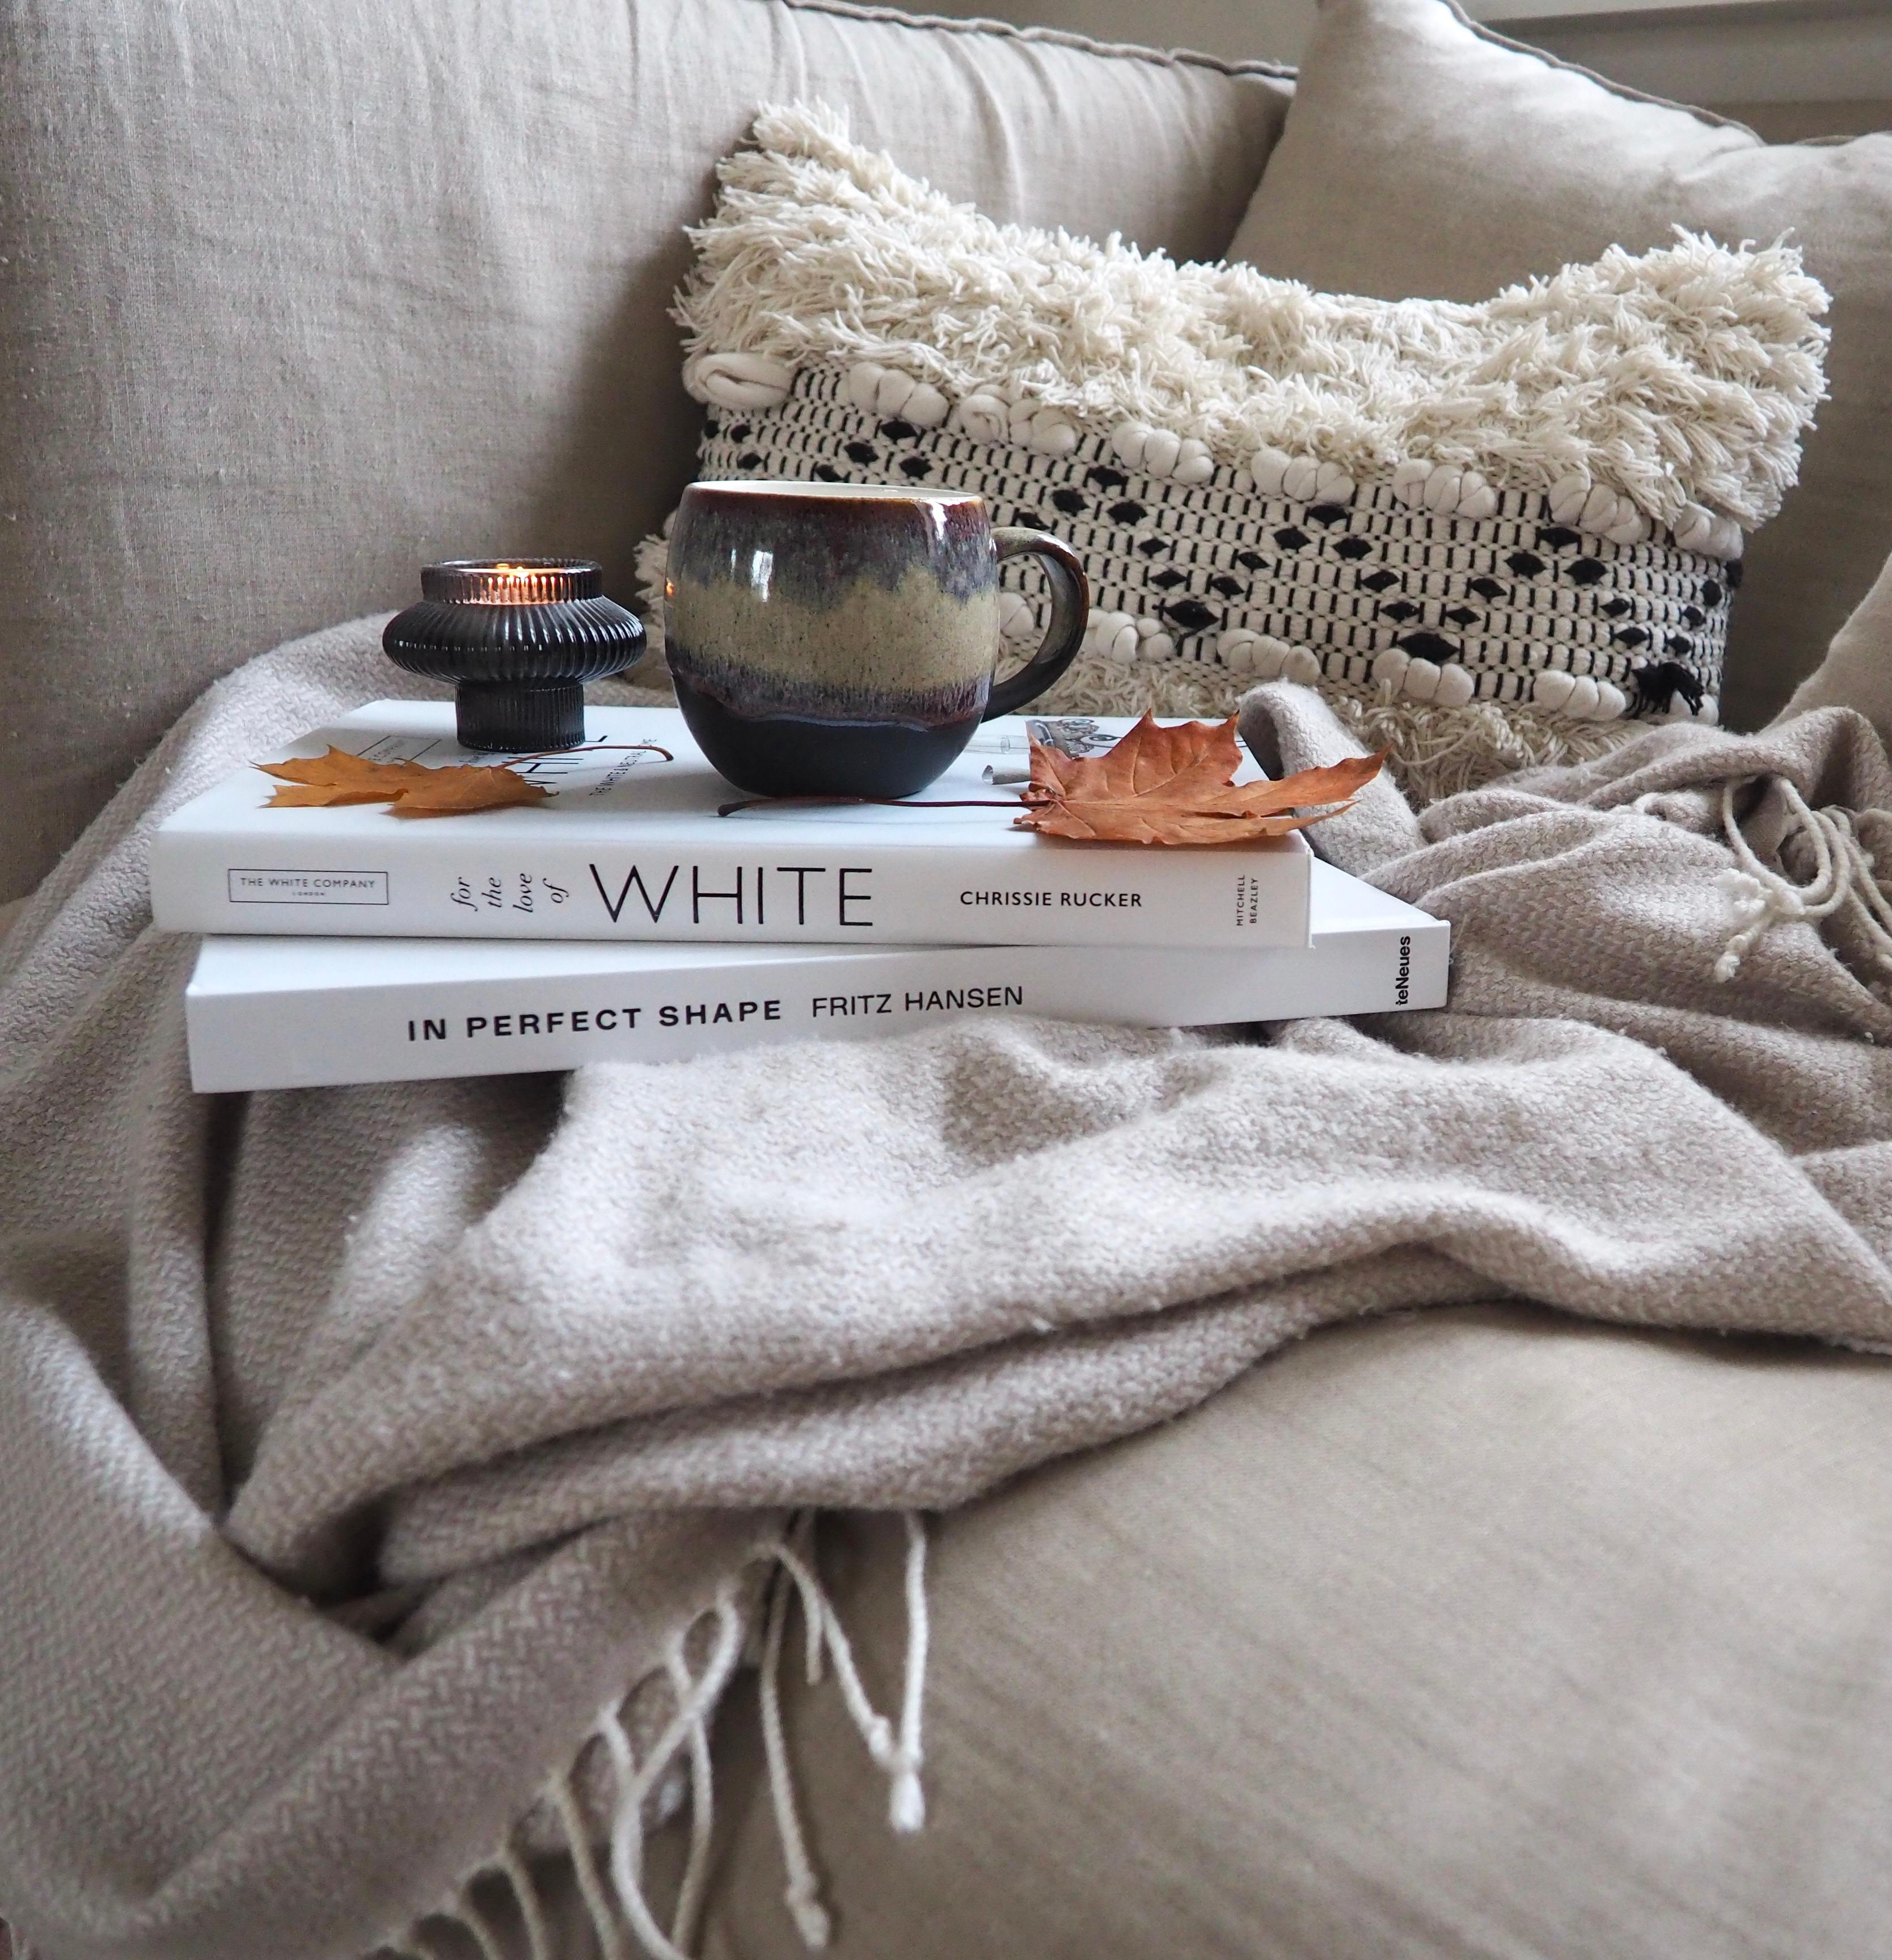 #herbstmoment #tassenliebe #tablebook #cozy #COUCHstyle #couchmagazin